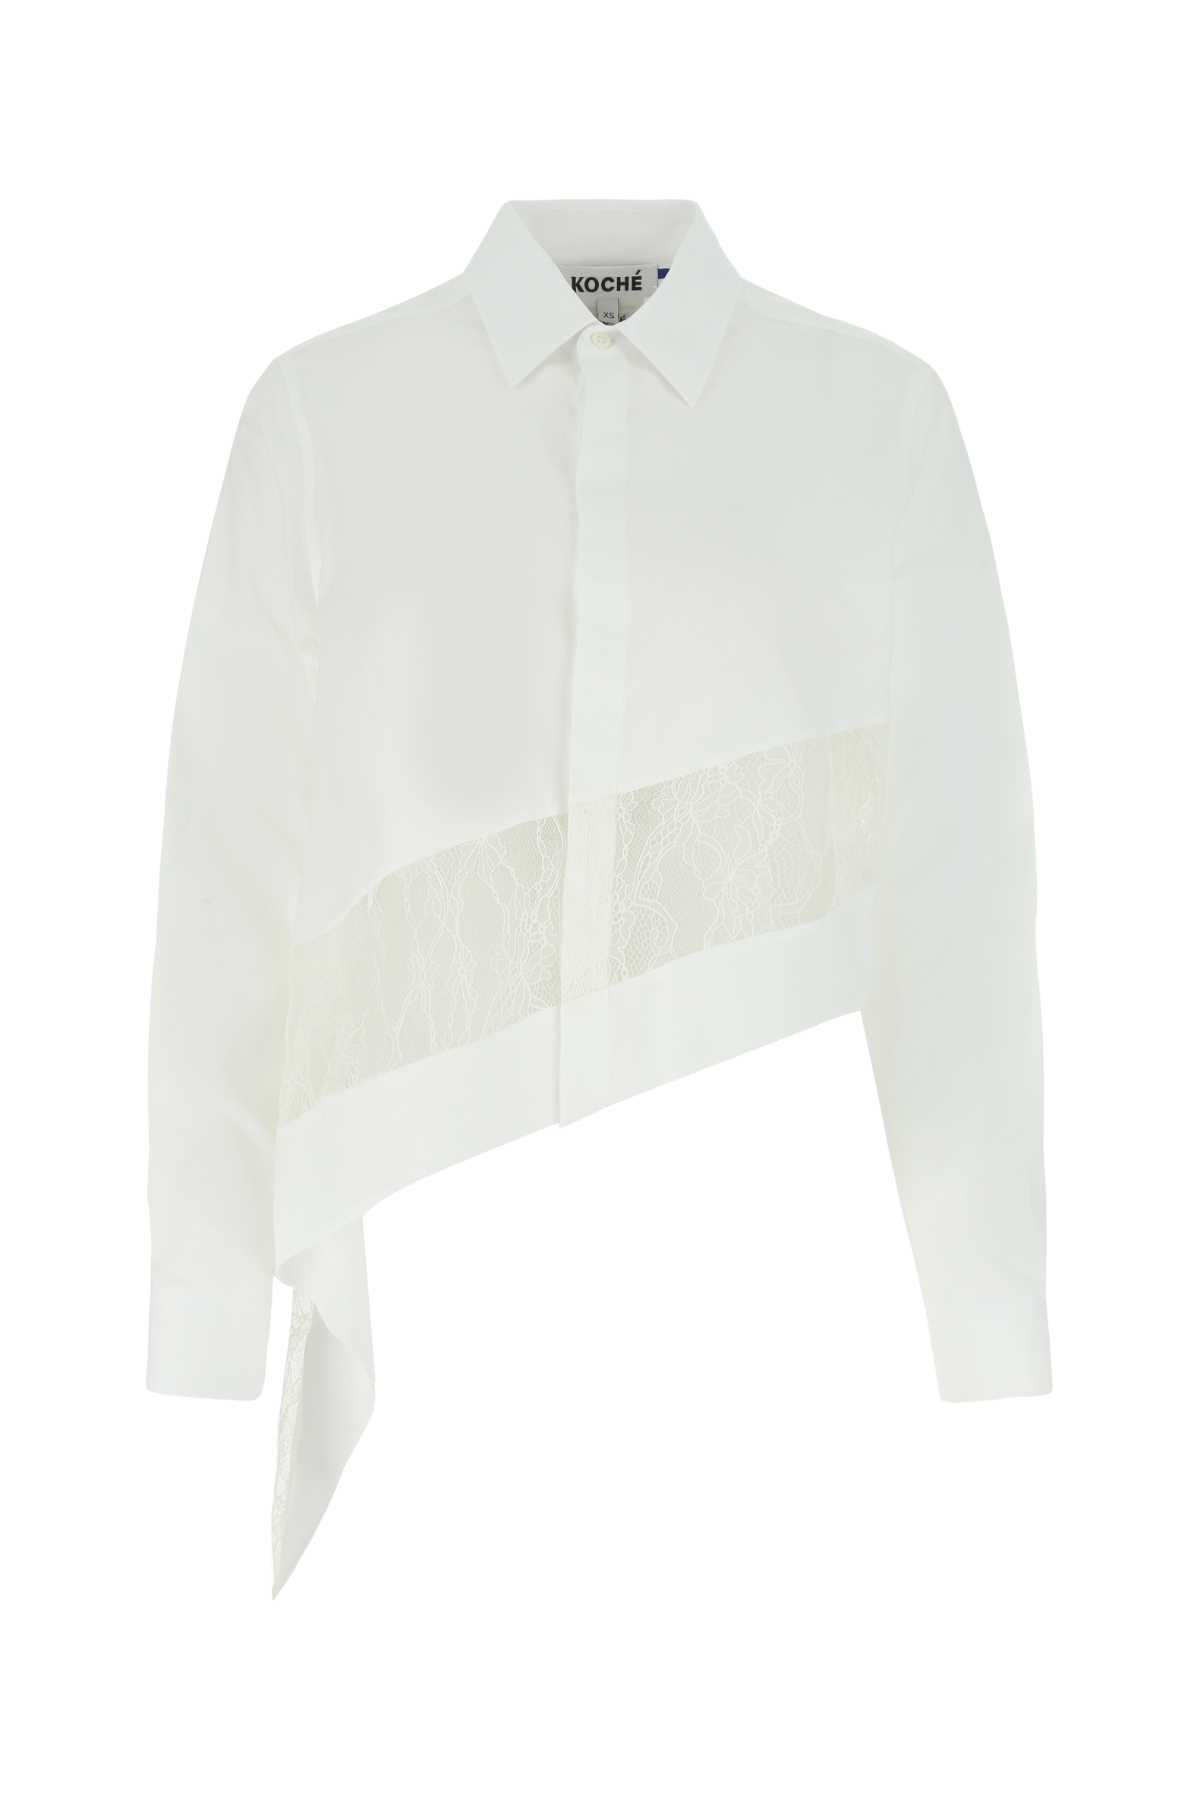 White Cotton And Lace Shirt